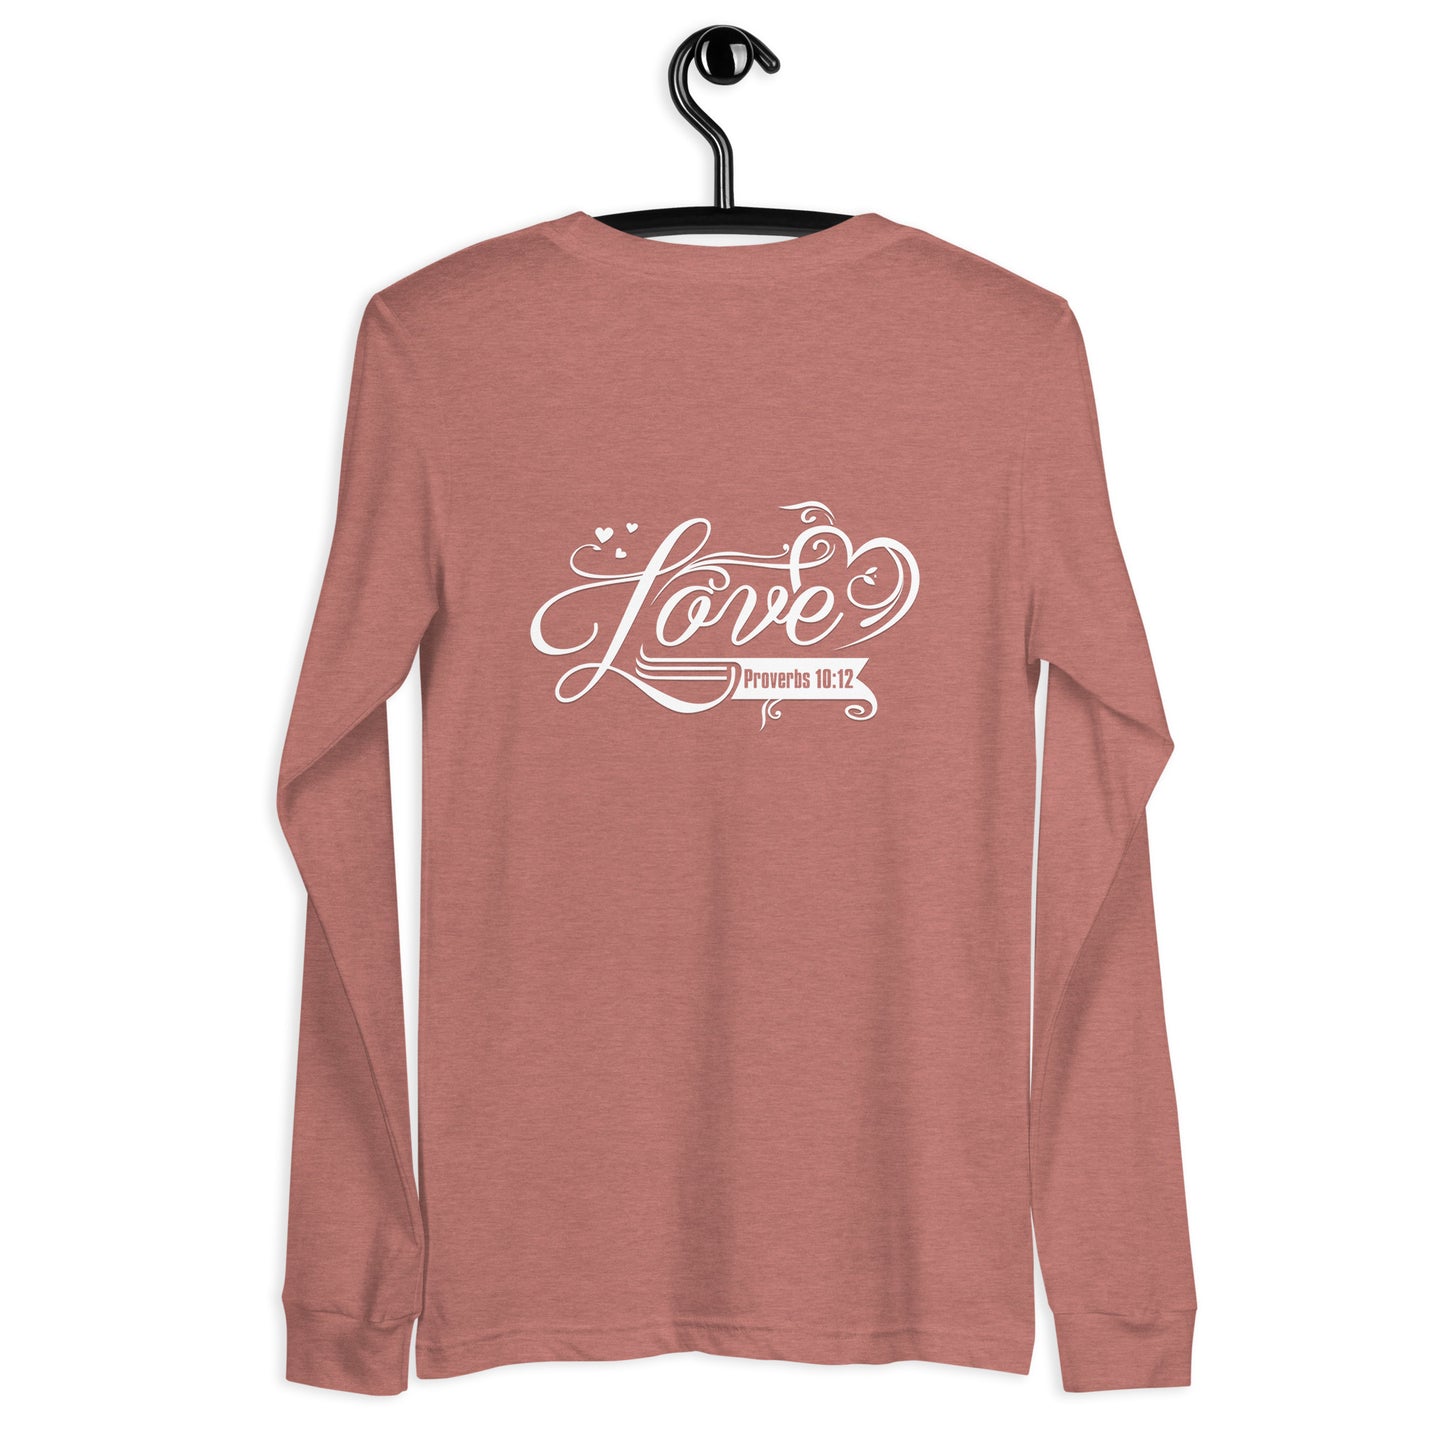 Love - Unisex Long Sleeve Tee - View All Colors